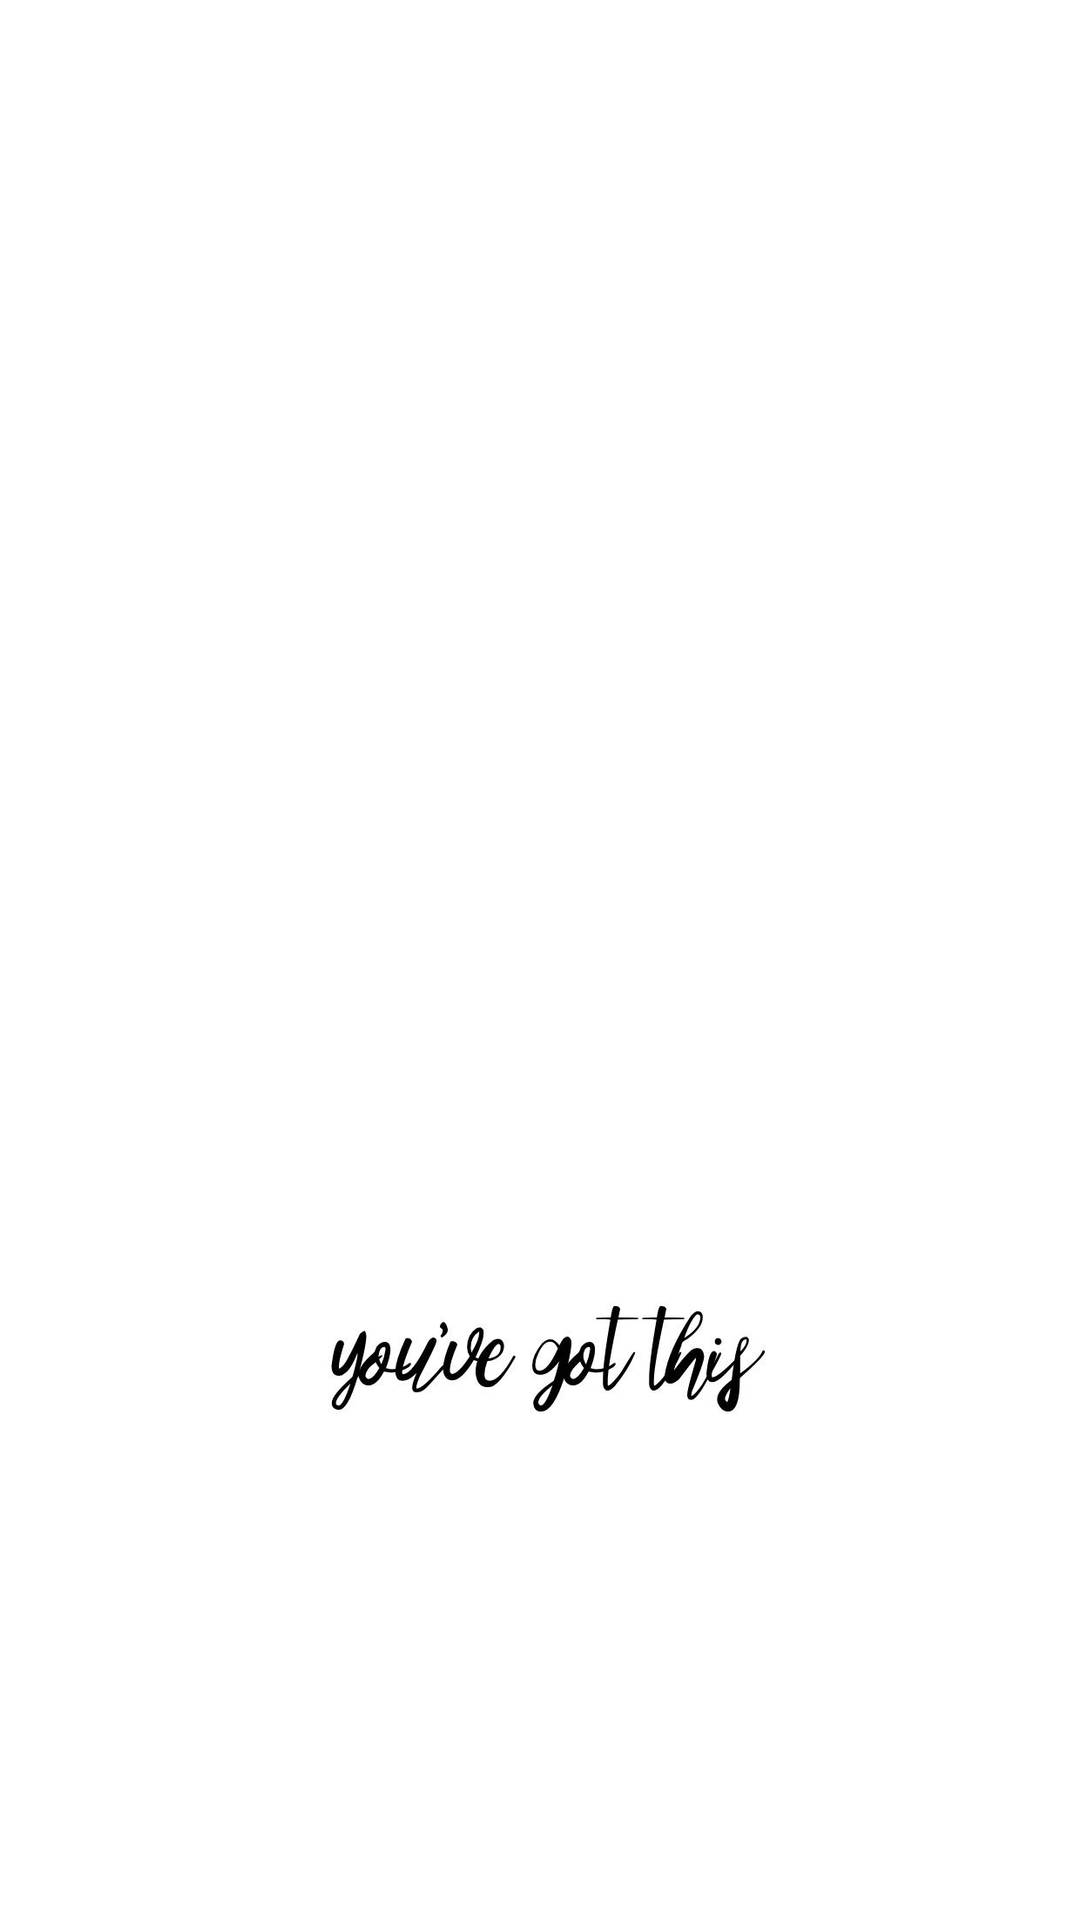 Motivational Cool Iphone White Wallpaper